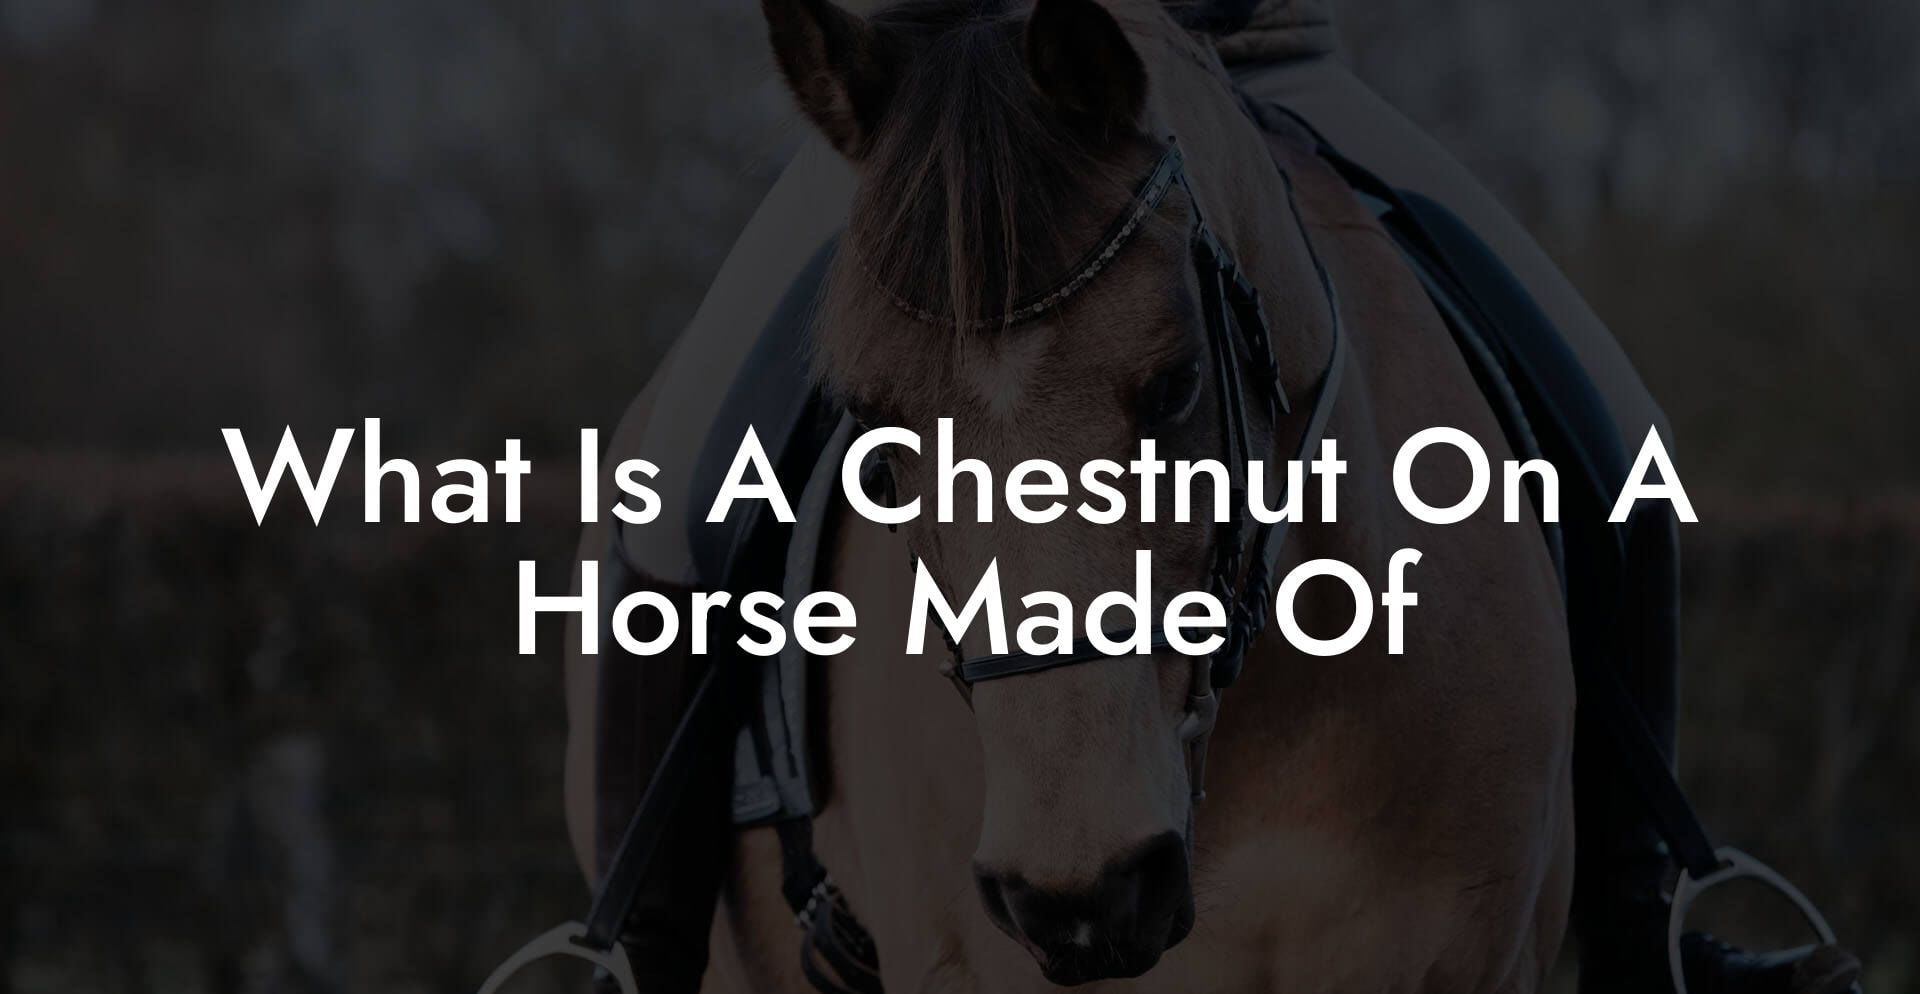 What Is A Chestnut On A Horse Made Of